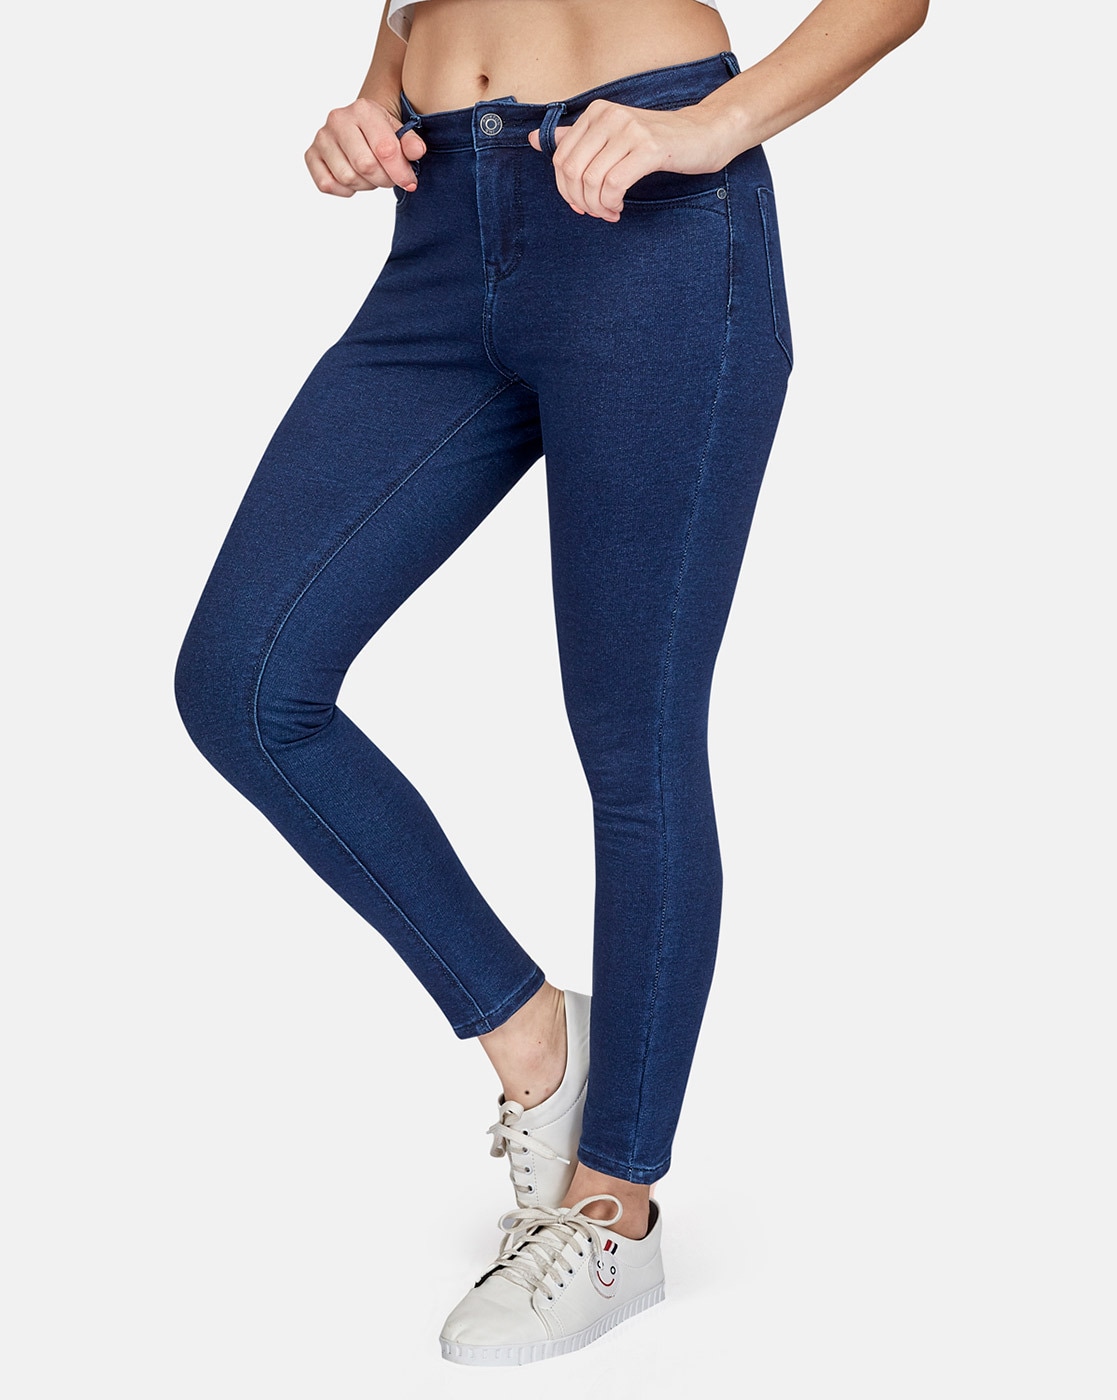 Roxworld Super Skinny Women Light Blue Jeans - Buy Roxworld Super Skinny Women  Light Blue Jeans Online at Best Prices in India